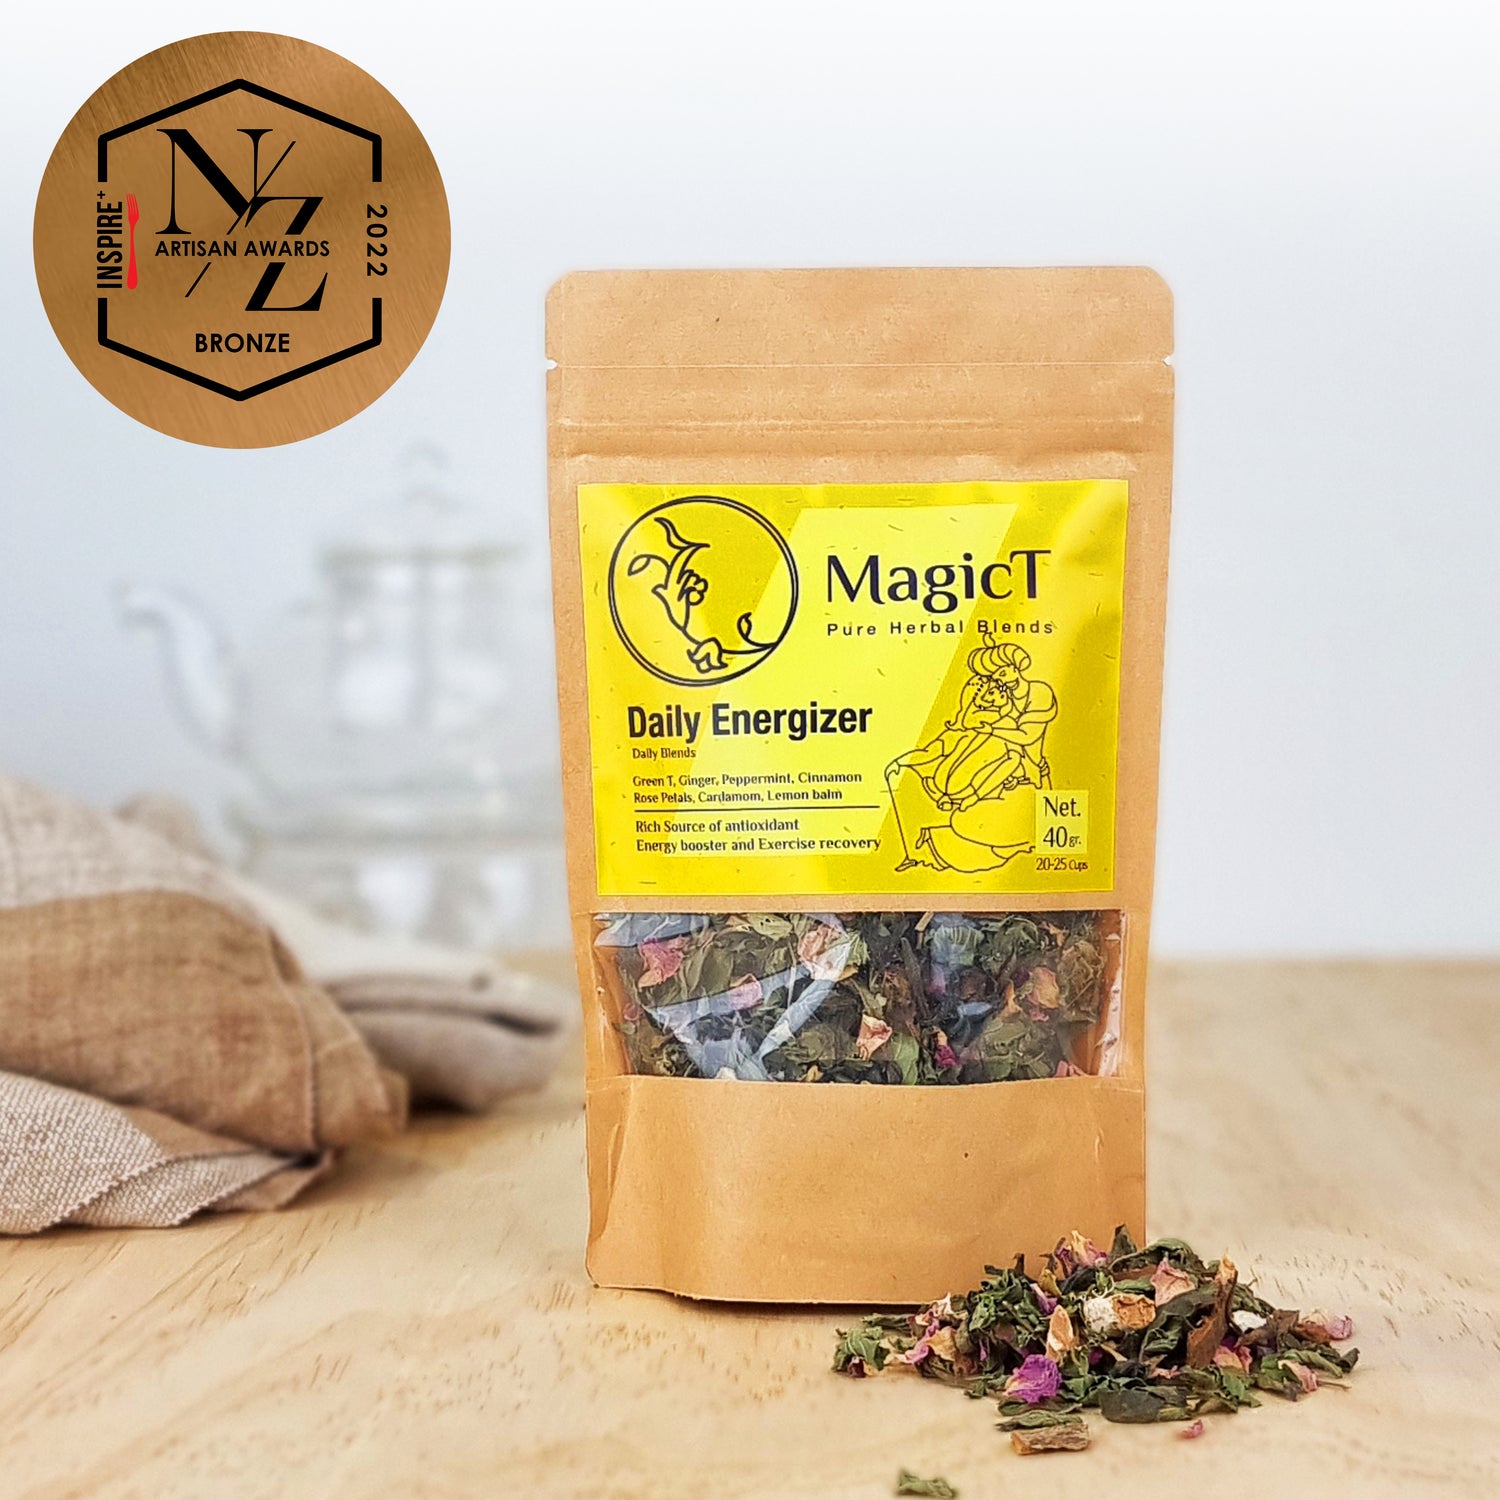 Daily Energizer : Green tea, Peppermint, Rose petal, Cardamom, Ginger and Cinnamon - Magic T